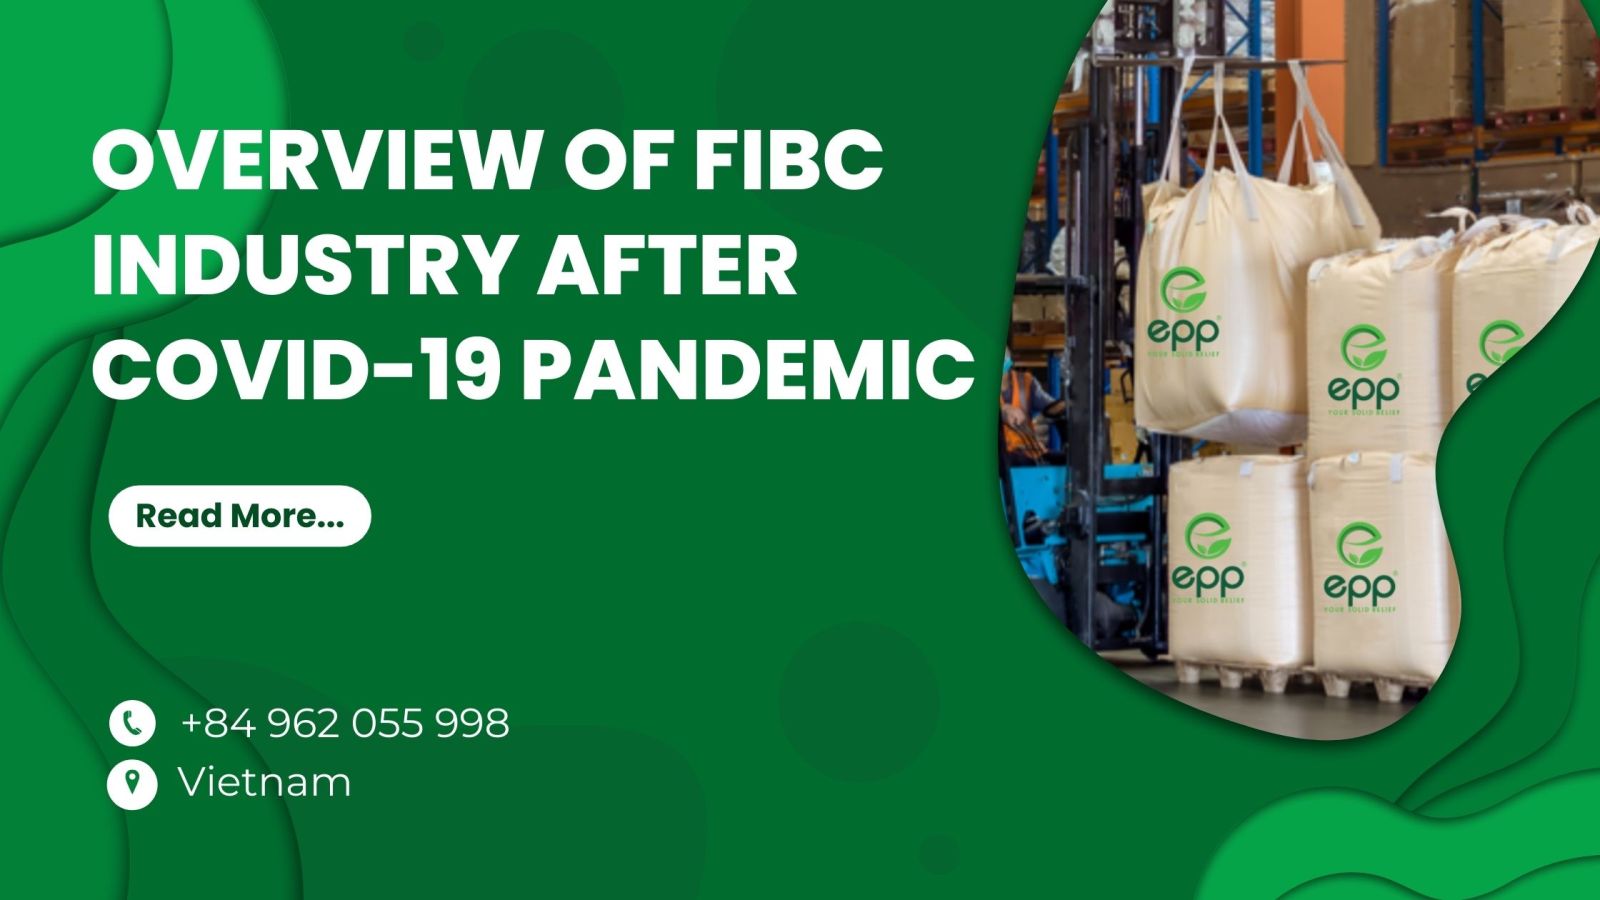 Overview-of-fibc-industry-after-Covid-19-pandemic.jpg